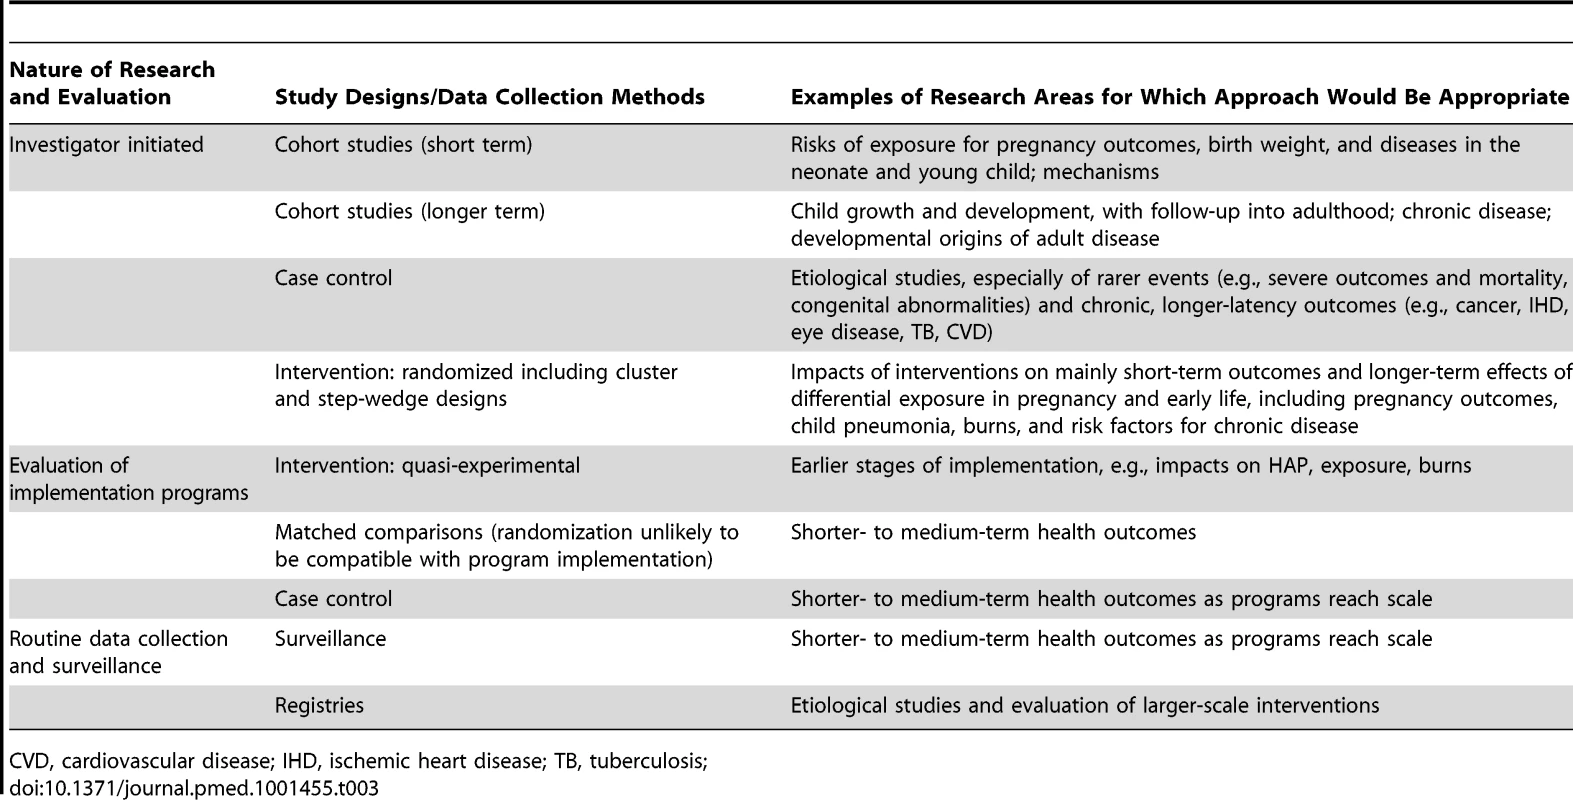 Approaches and key study designs required to address research and evaluation priorities.